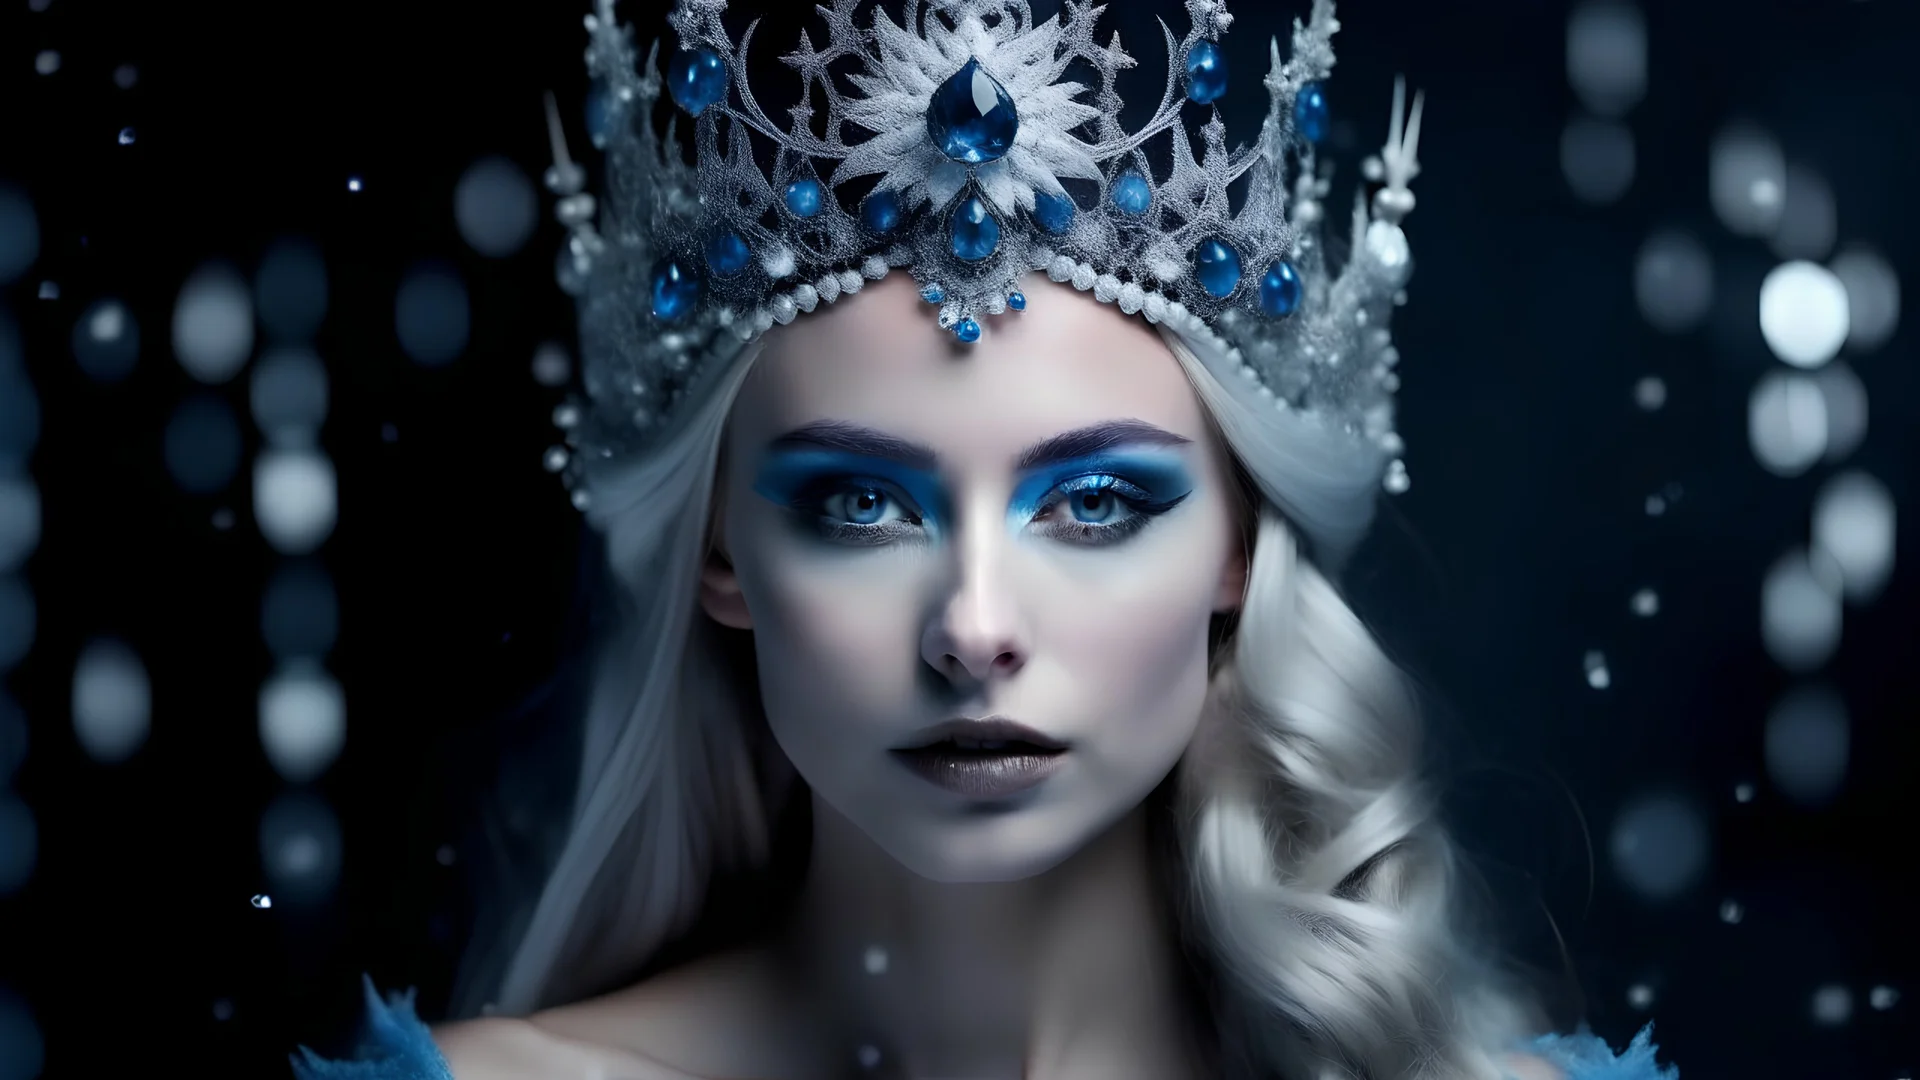 Beautiful and mystical snow queen, with crown on head adorned with blue gemstones